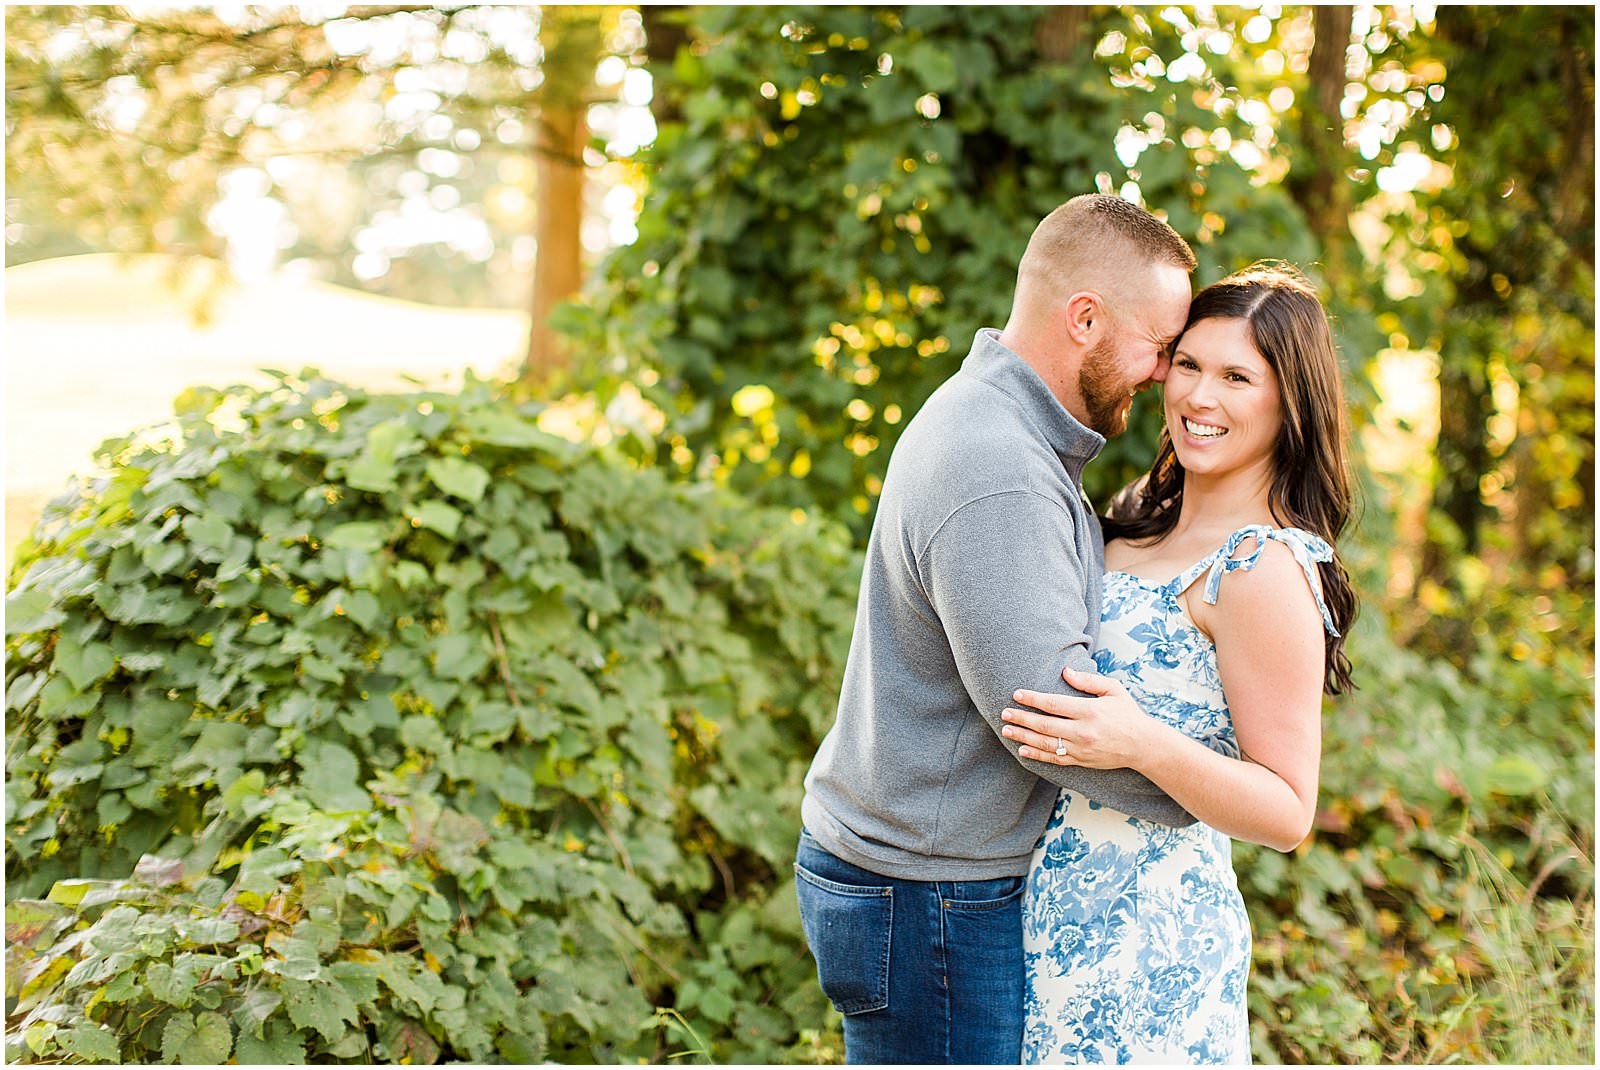 A Rolling Hills Country Club Engagement Session | Meagan and Kyle | Bret and Brandie Photography 0023.jpg